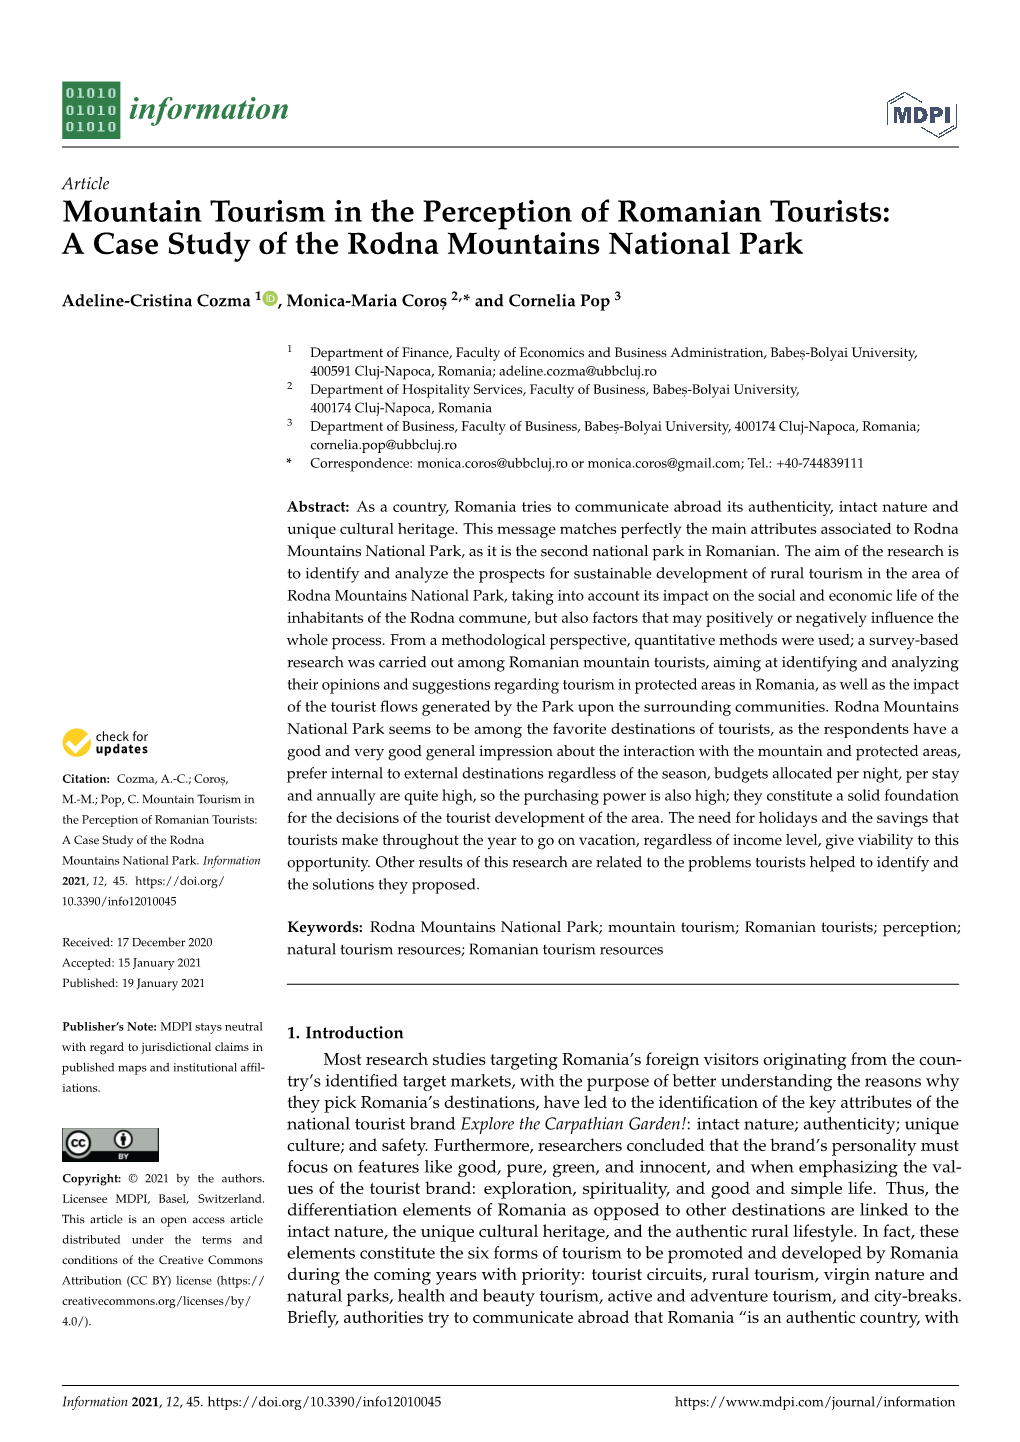 A Case Study of the Rodna Mountains National Park